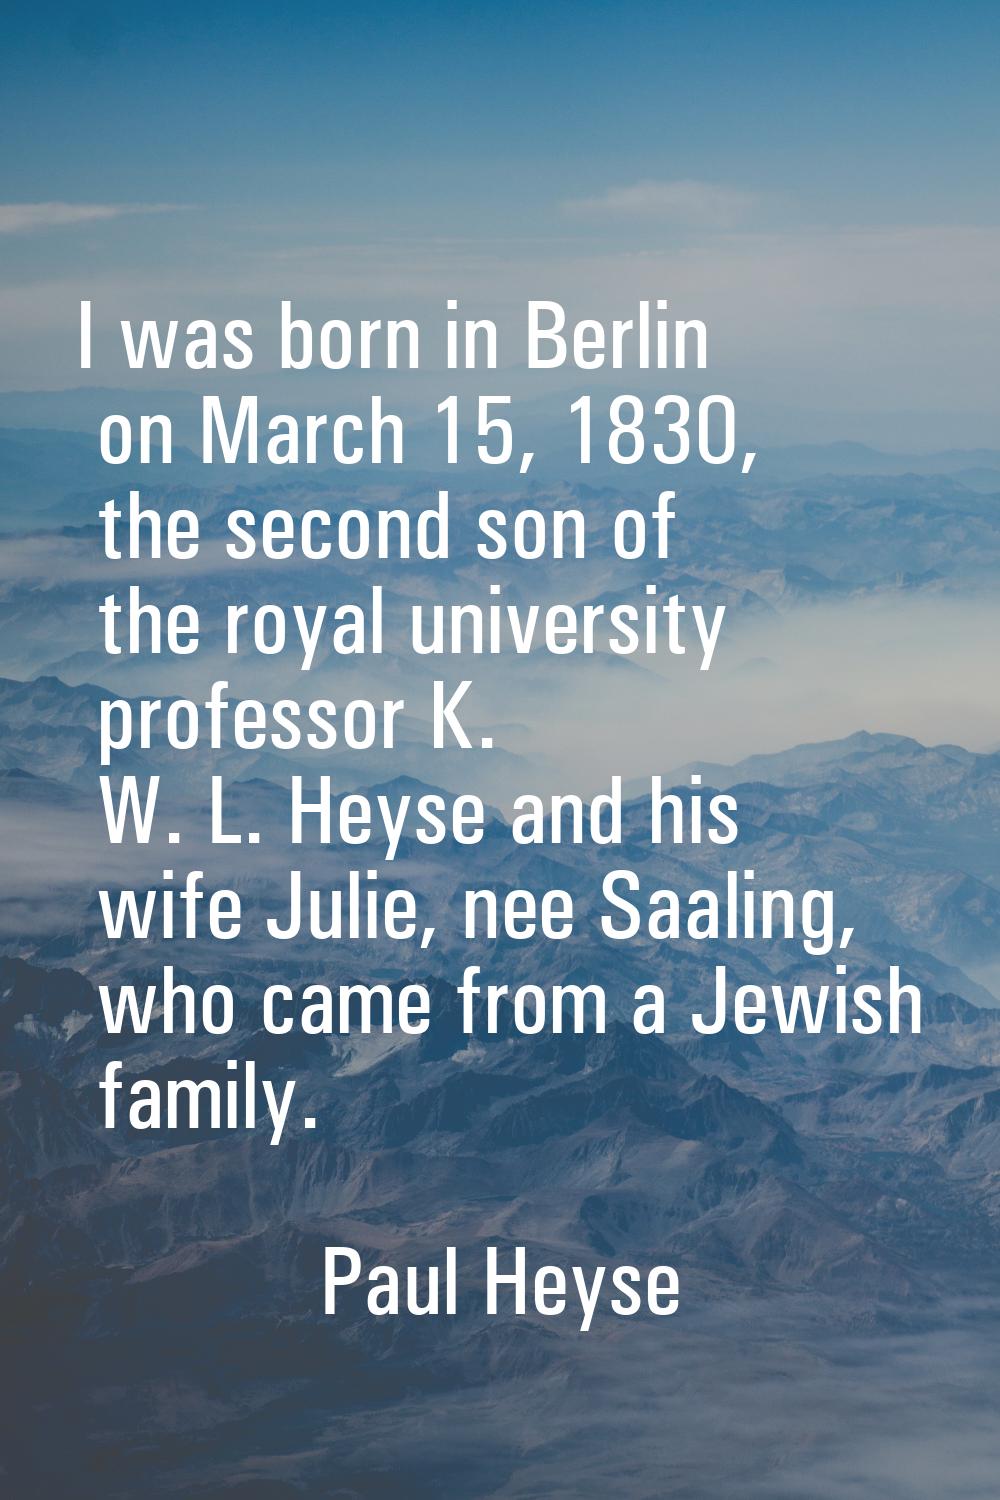 I was born in Berlin on March 15, 1830, the second son of the royal university professor K. W. L. H